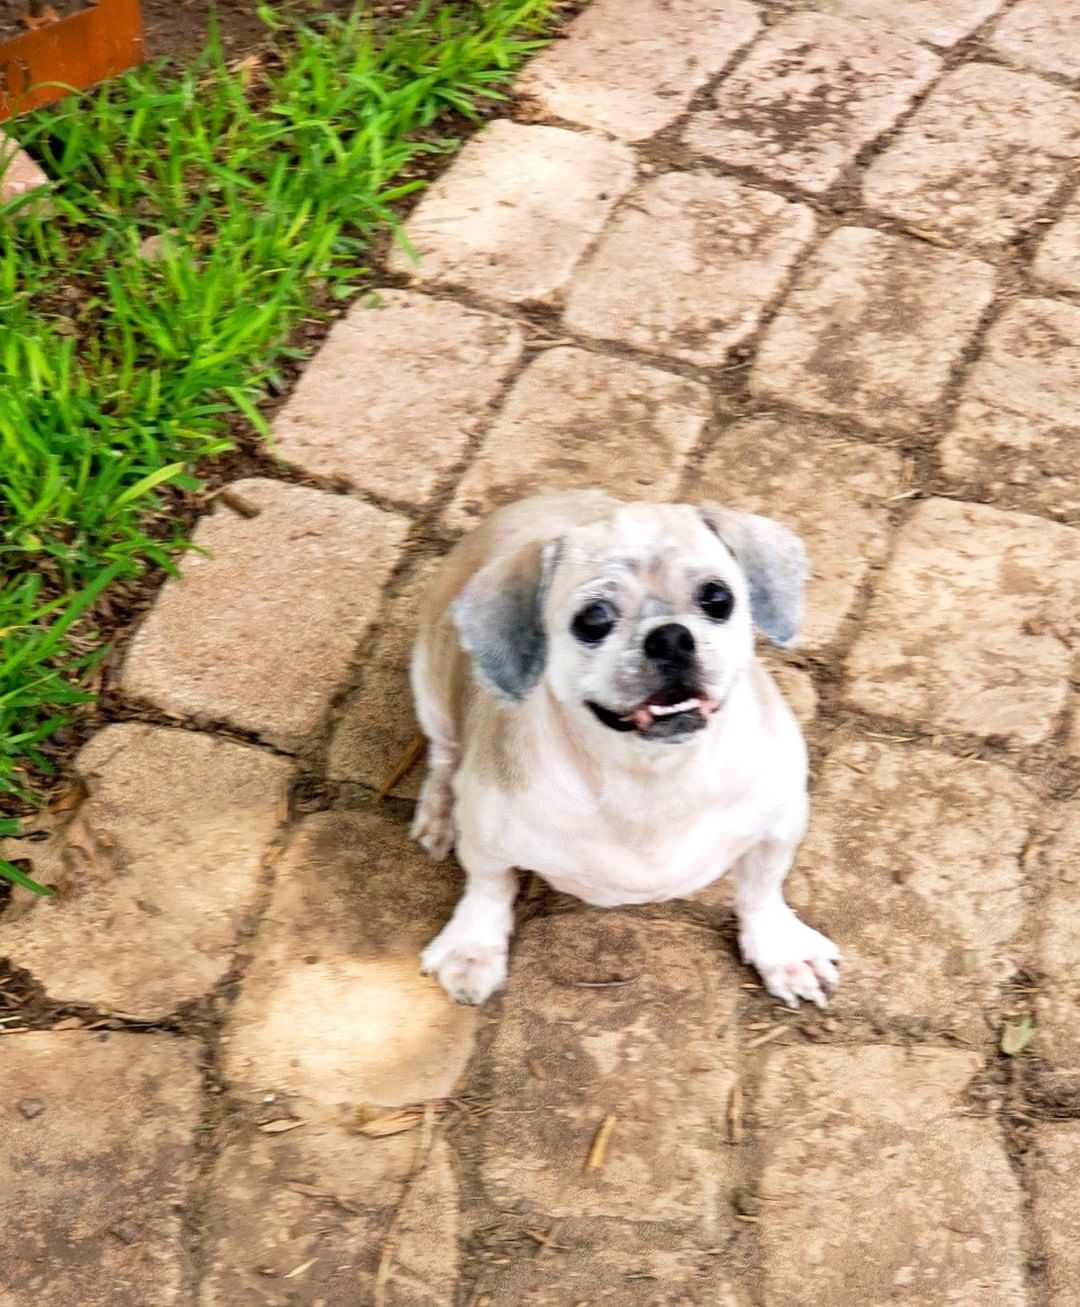 Helena is a 5 yr old , 15 lb ,  Female,  Lhasa Apso.  She is current on shots,  needs a spay and to have my Vet check her out.
Looks like she ad a hot spot on her back close to her tail and was shaved down completely. 
Thank you for picking her up for me today  Christina Caiñas Harrell